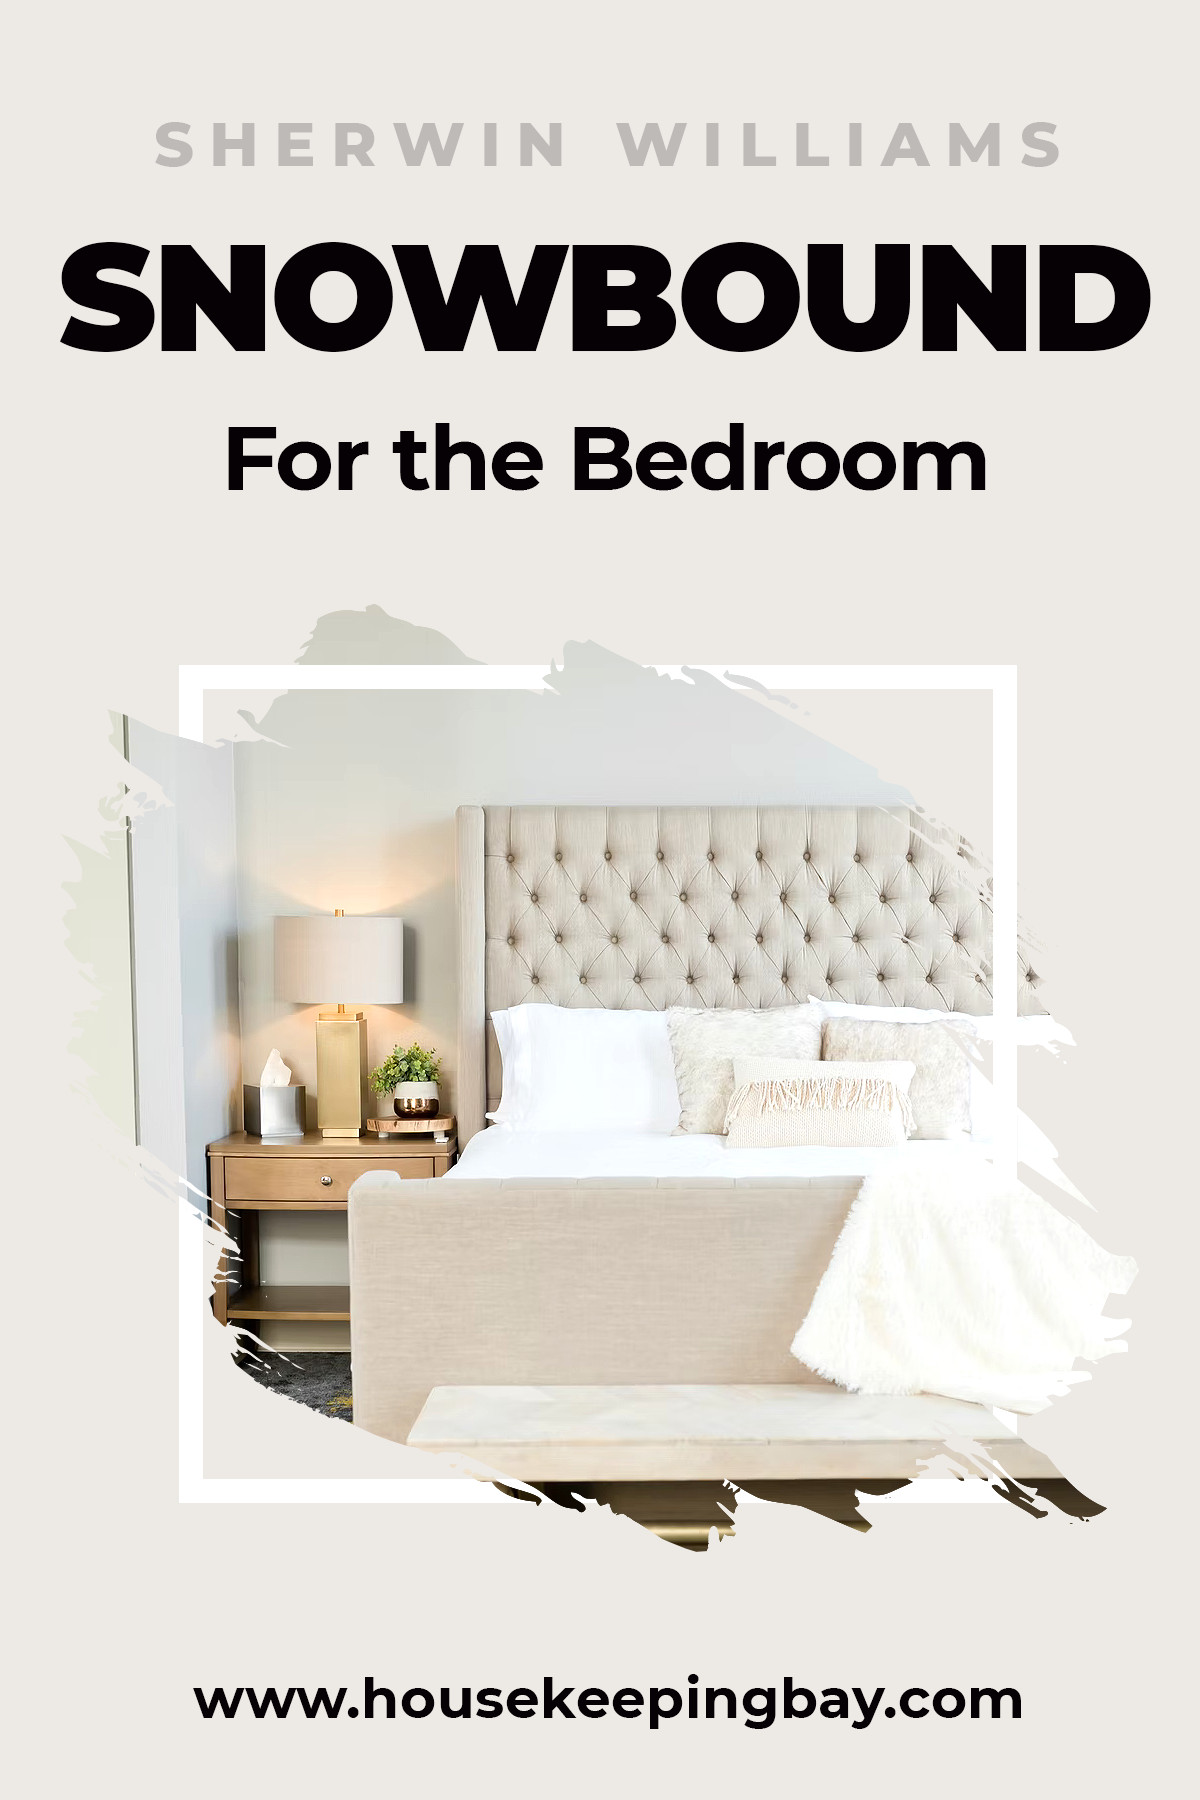 Snowbound For the Bedroom